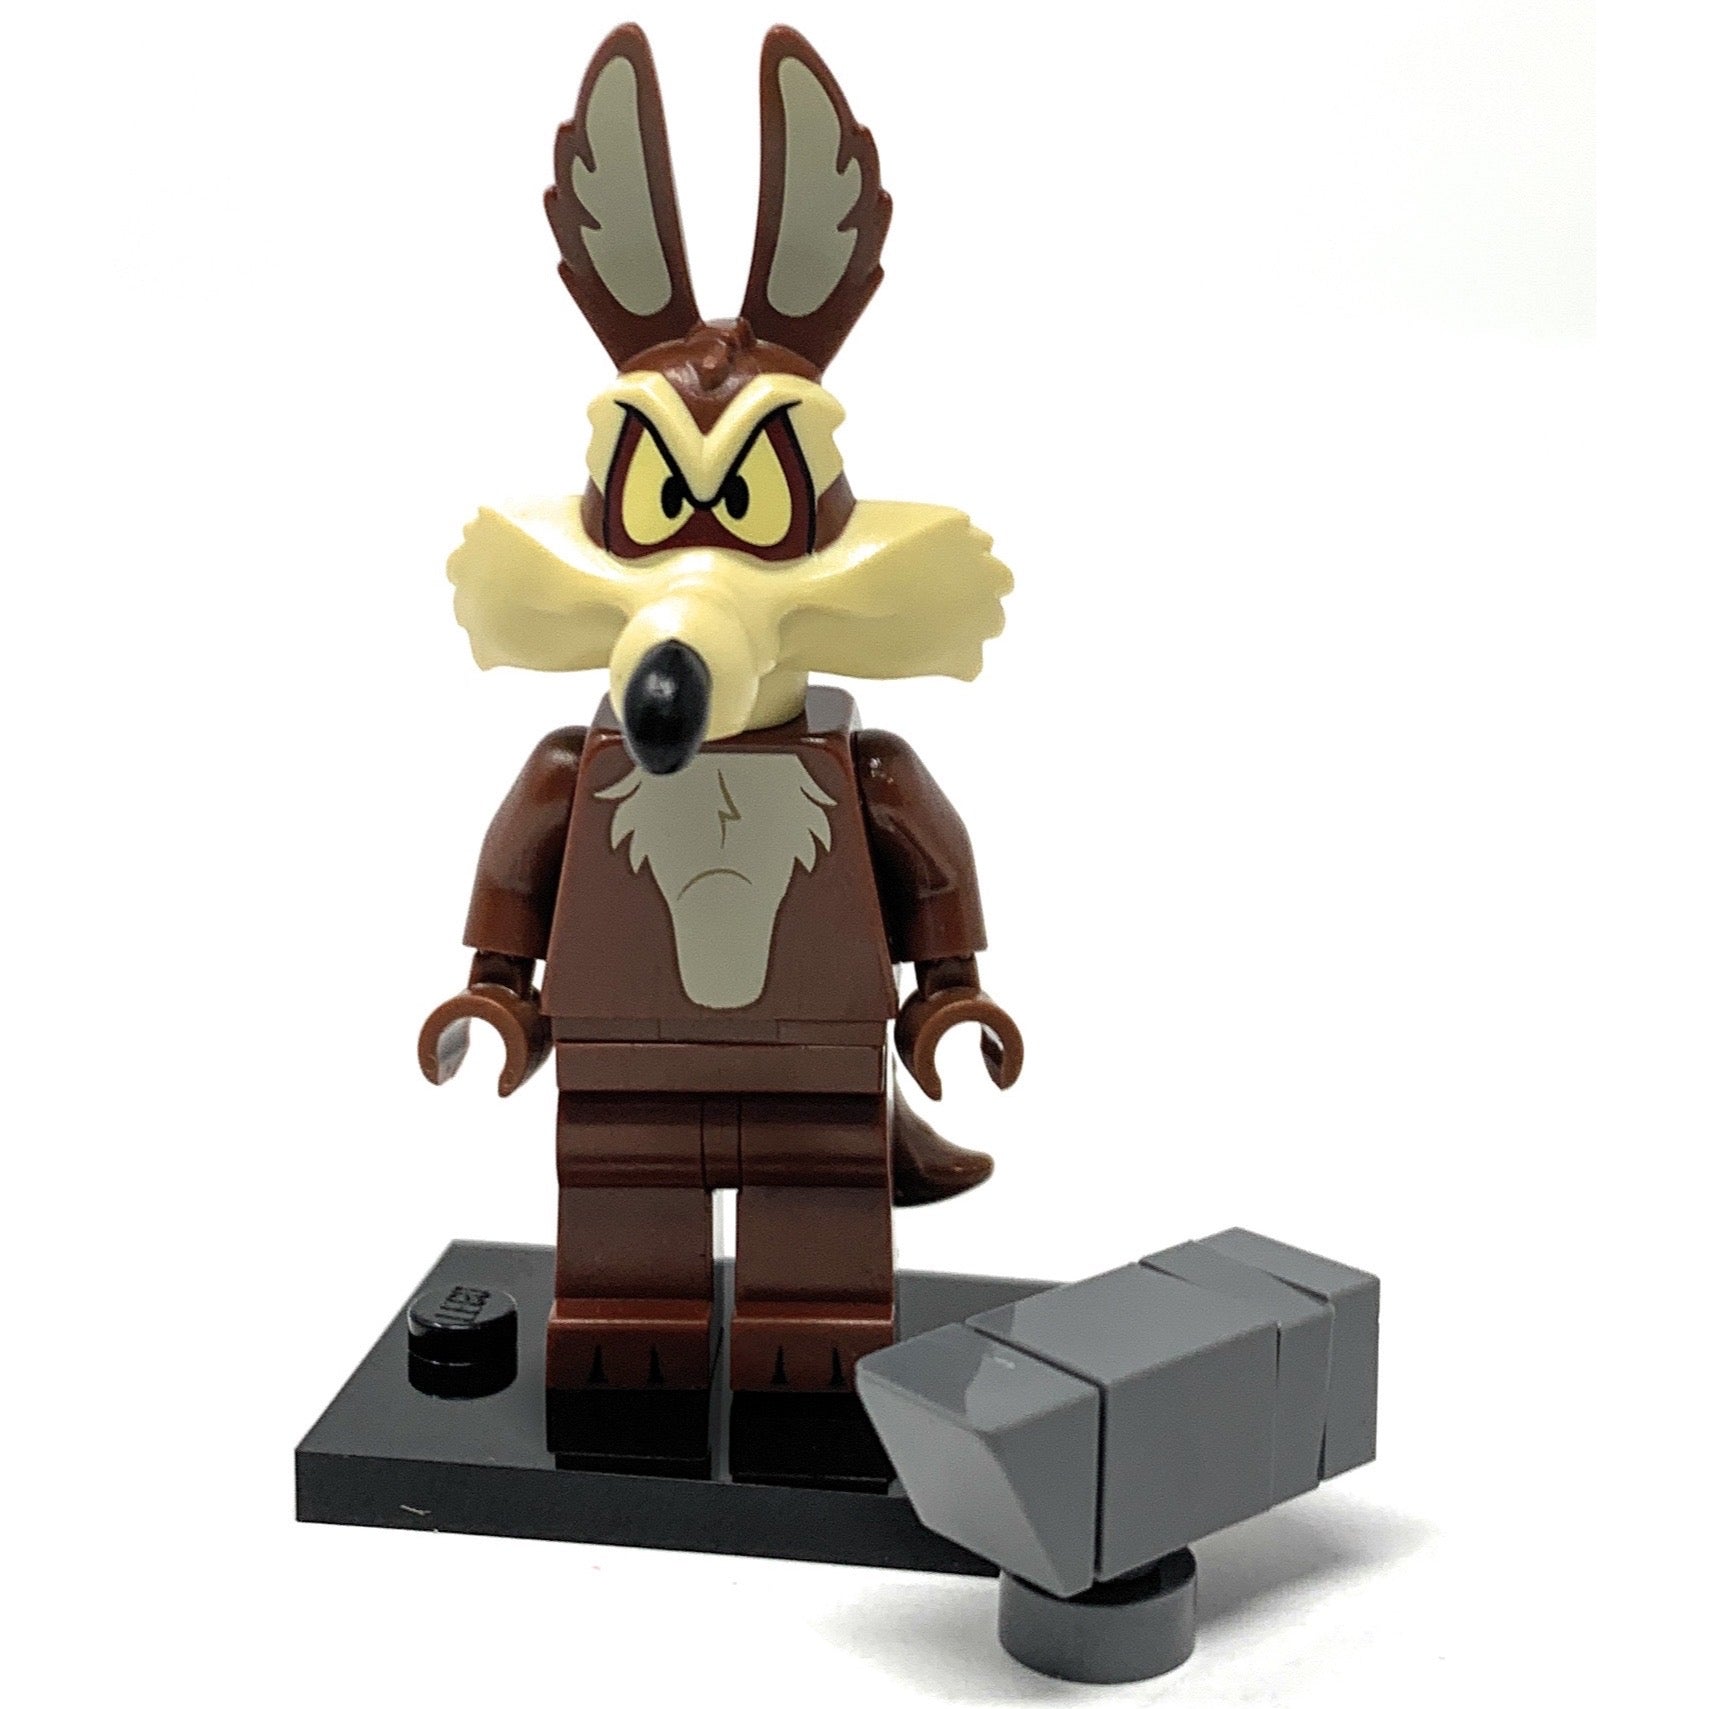 Wile E. Coyote  - LEGO Looney Tunes Collectible Minifigure (Series 1) (2021)